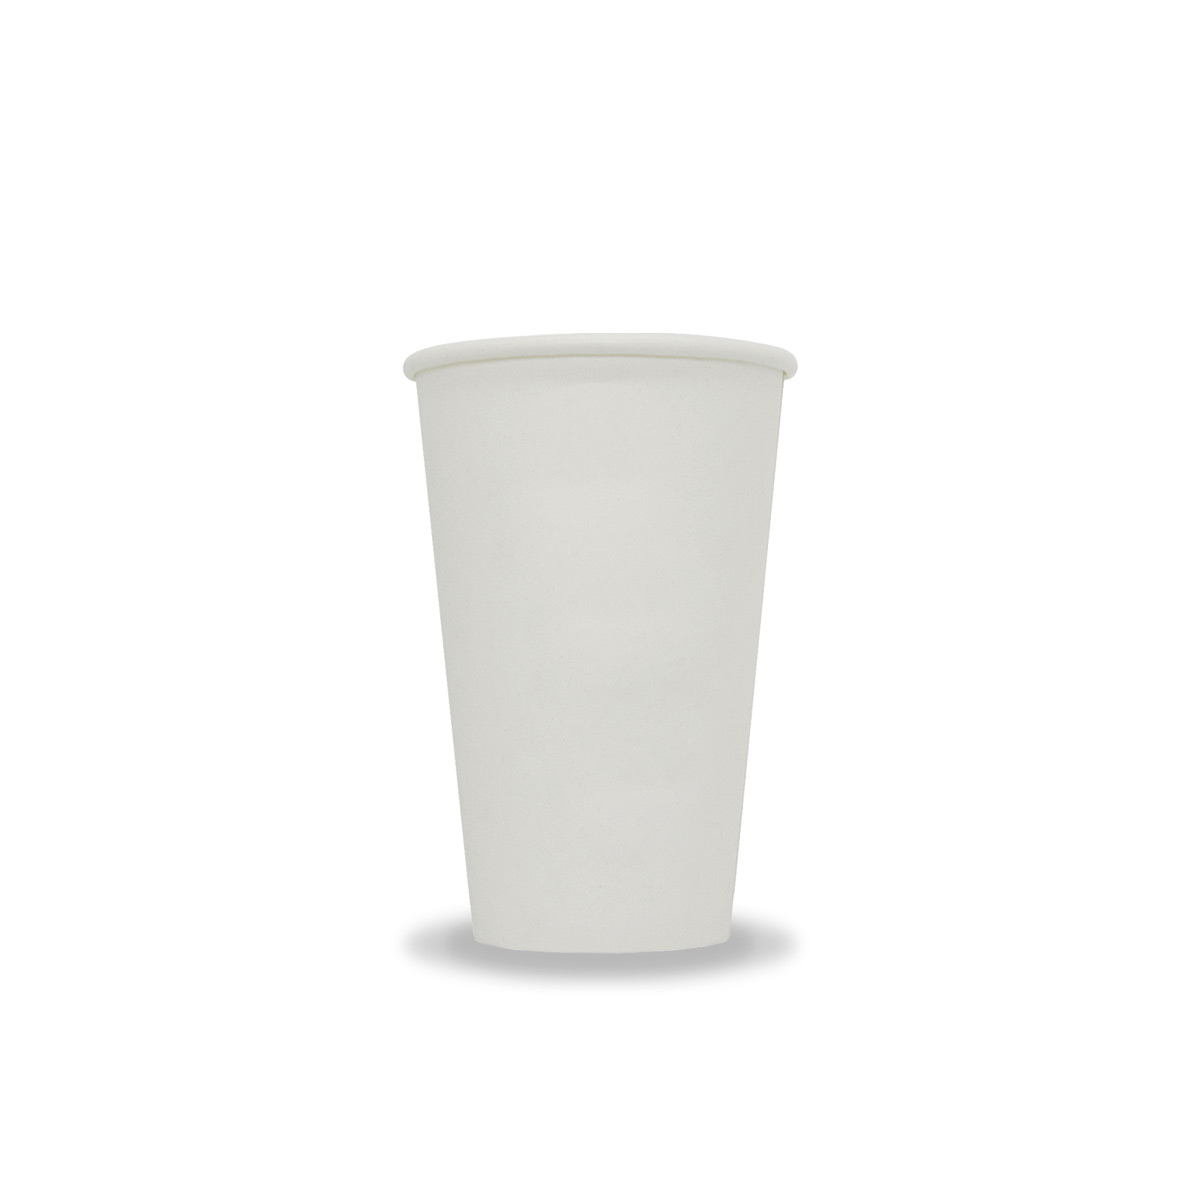 https://affinity.supply/wp-content/uploads/2020/09/Single-Wall-White-Paper-Cup-12oz-Slim.jpg